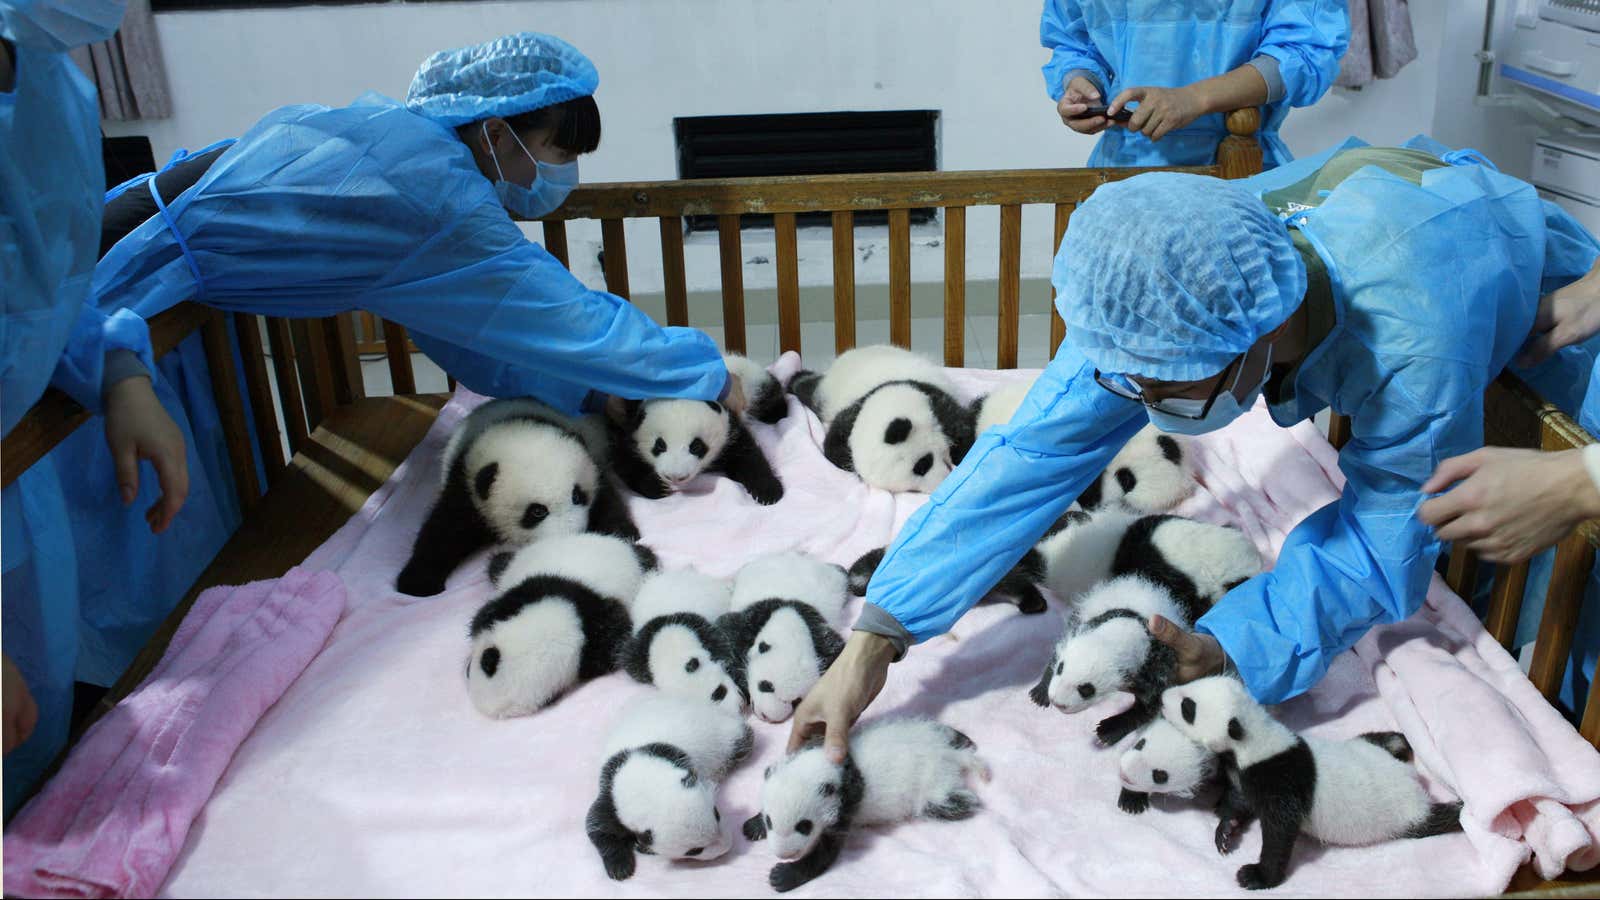 89. In September, giant pandas became the latest species to be taken off the endangered list.